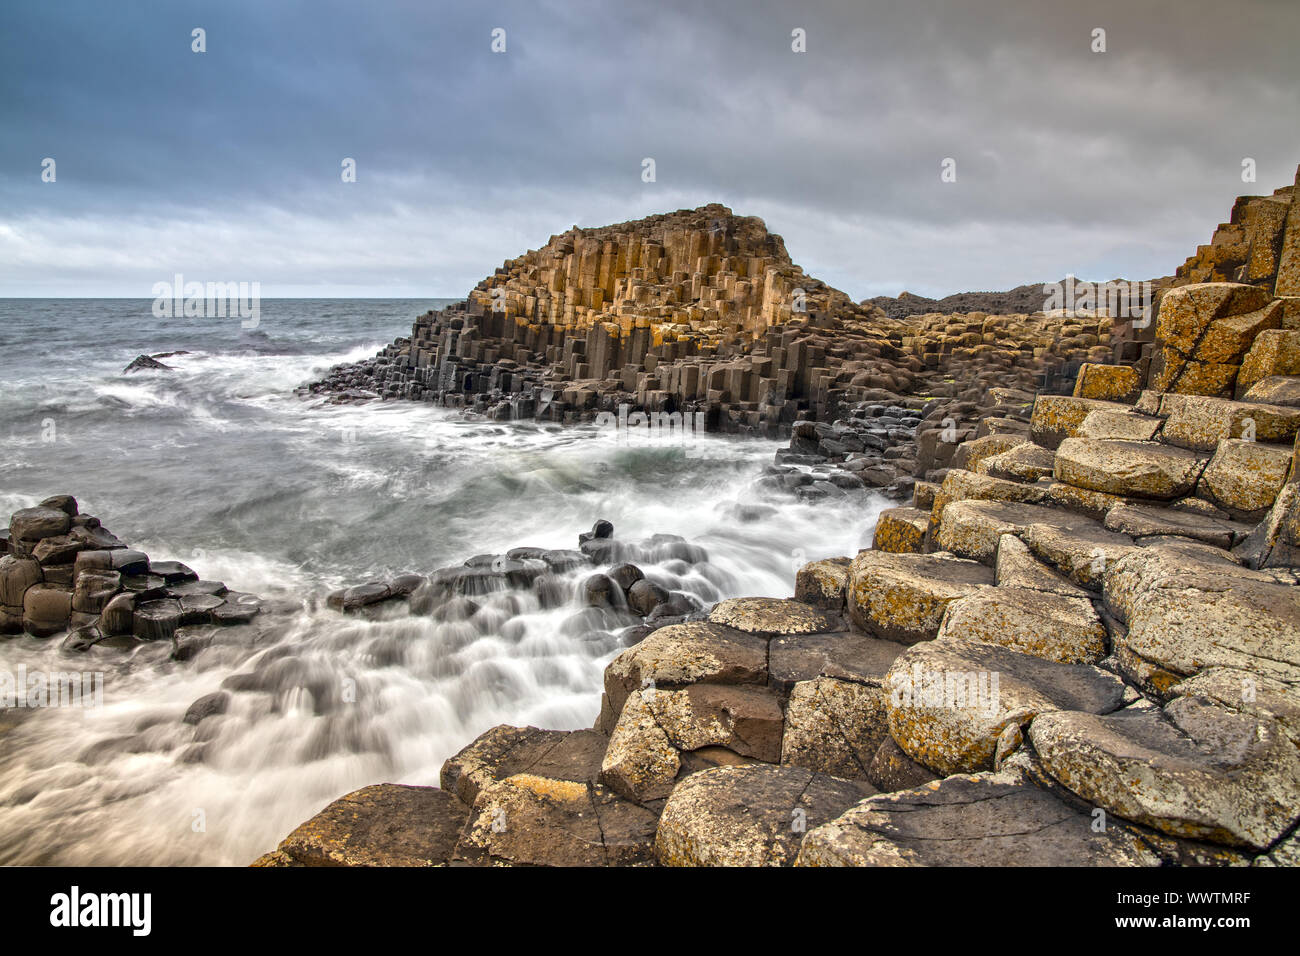 Impression of the Giants Causeway in Northern Ireland Stock Photo